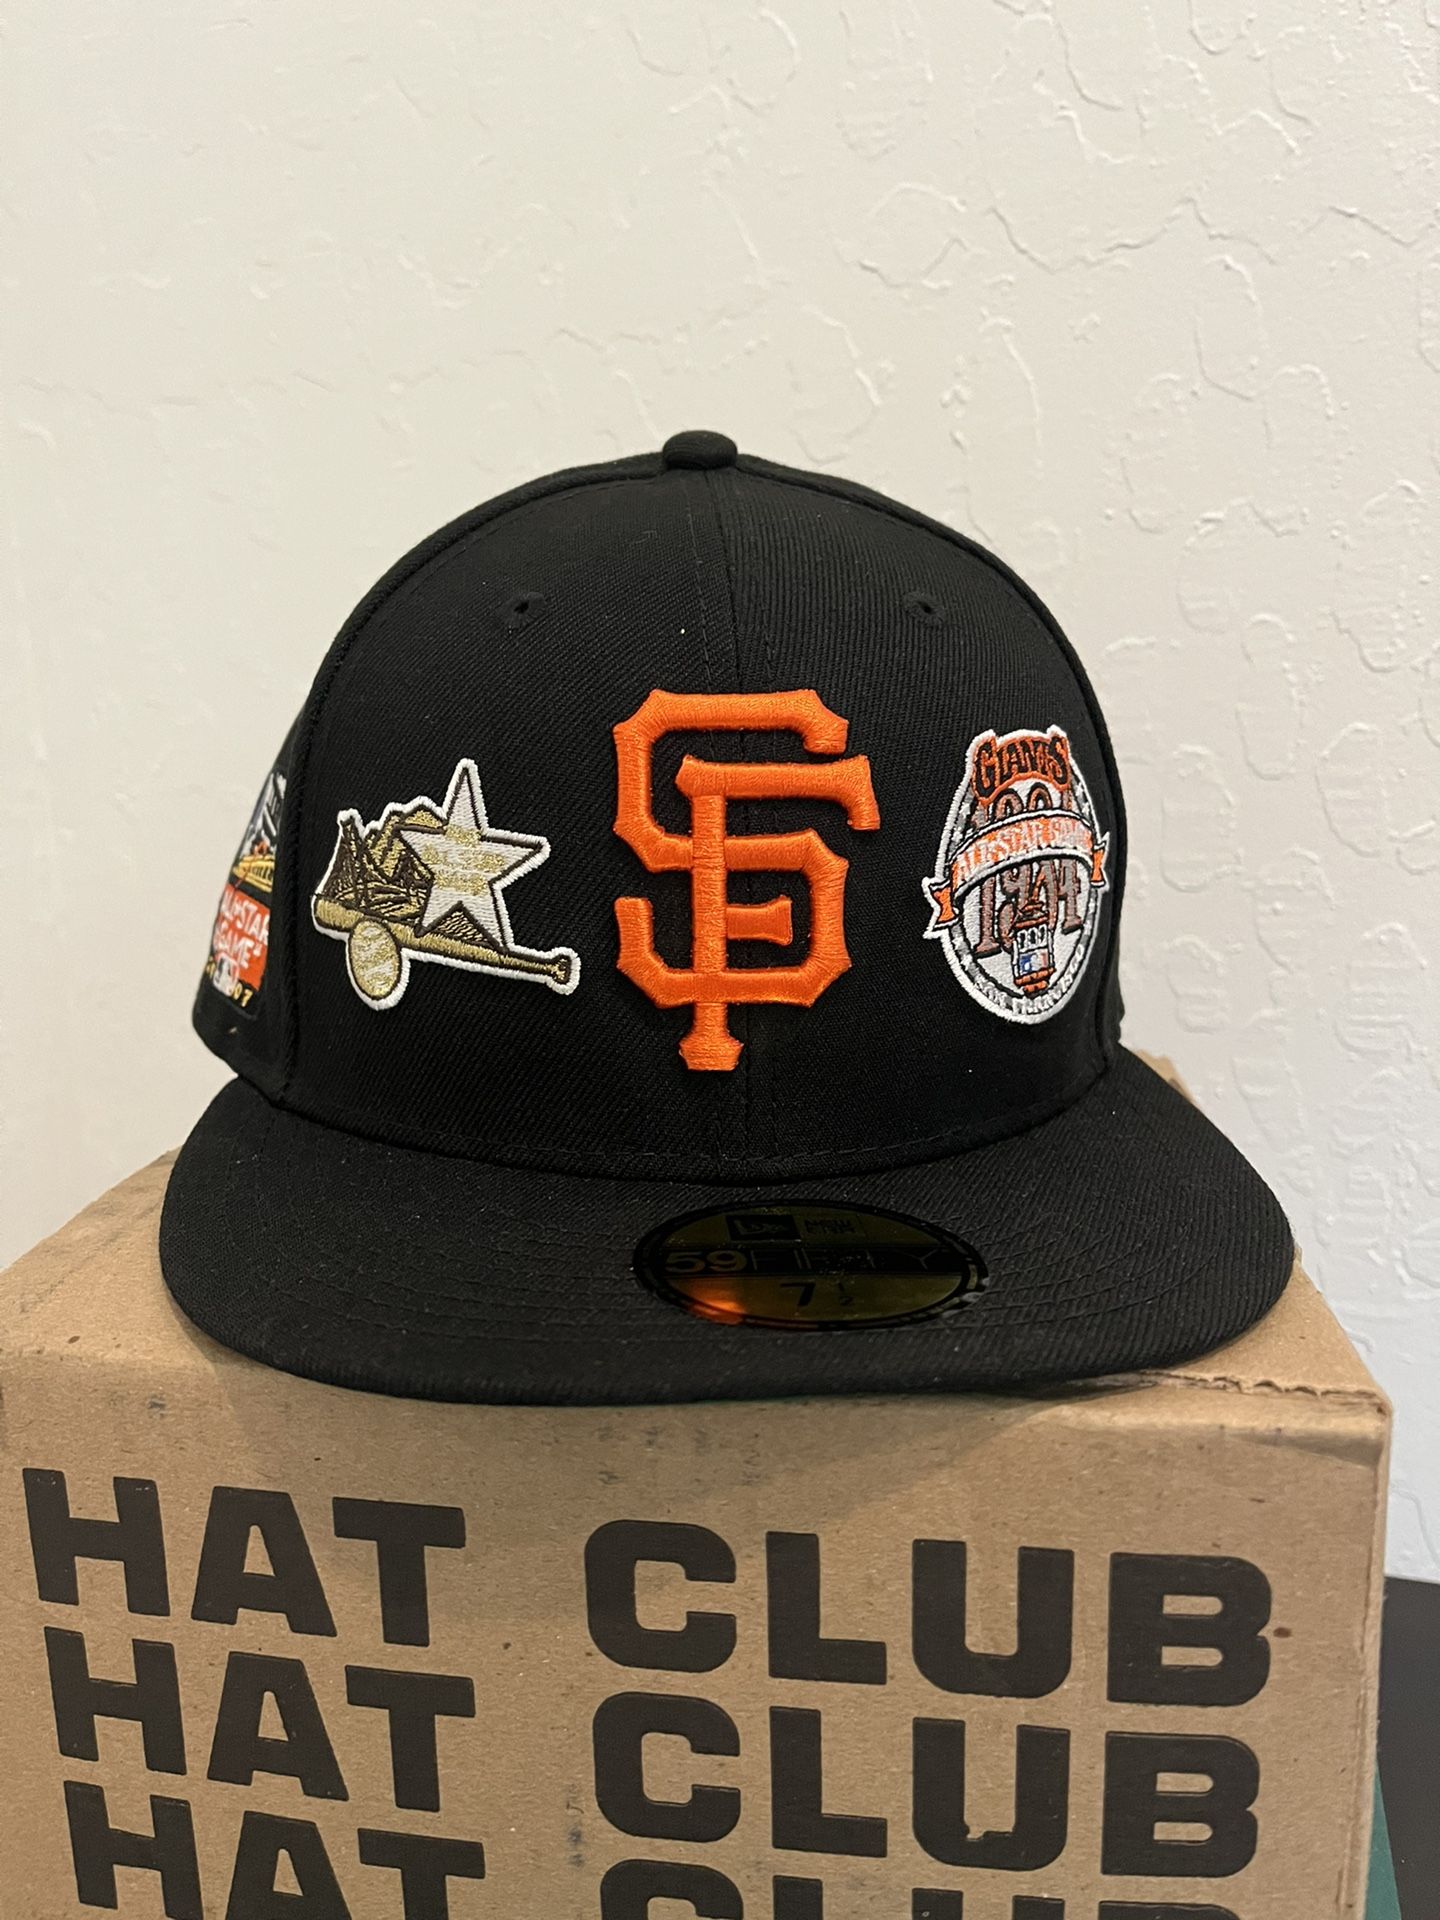 Hat Club SF Giants All Star Patches Sz 7 1/2